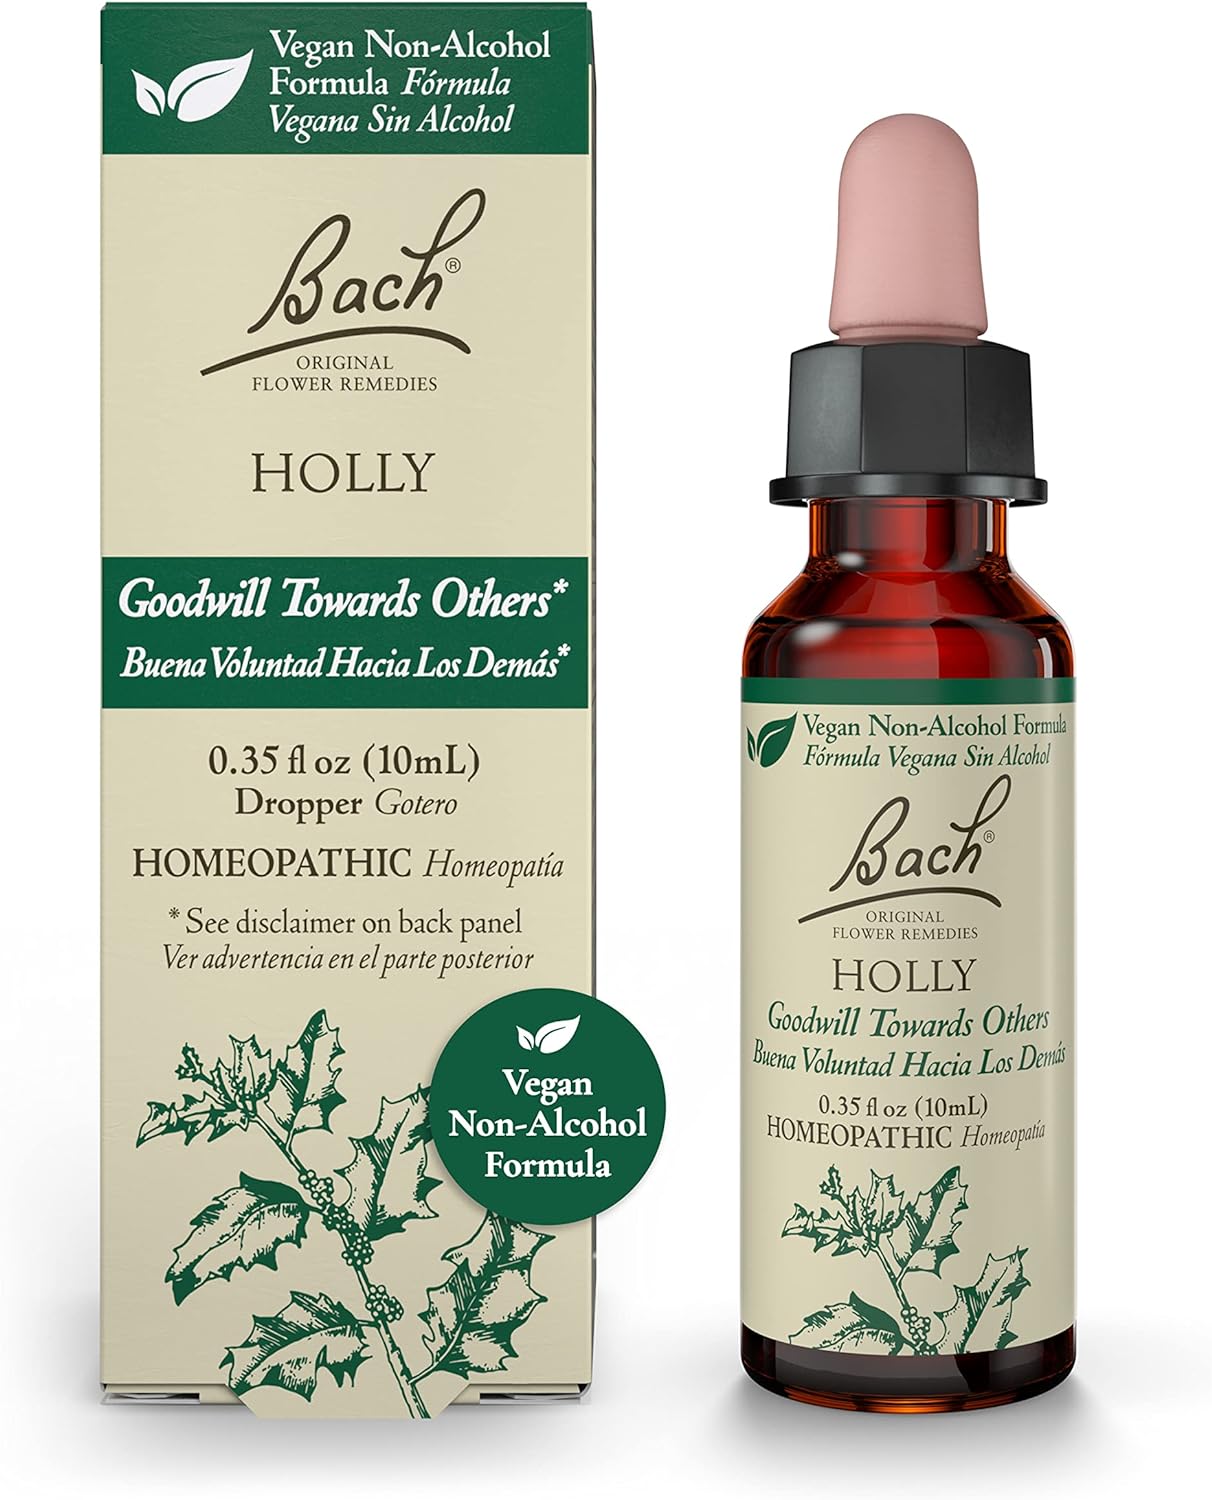 Bach Original Flower Remedies, Holly for Goodwill Towards Others (Non-Alcohol Formula), Natural Homeopathic Flower Essence, Holistic Wellness and Stress Relief, Vegan, 10mL Dropper